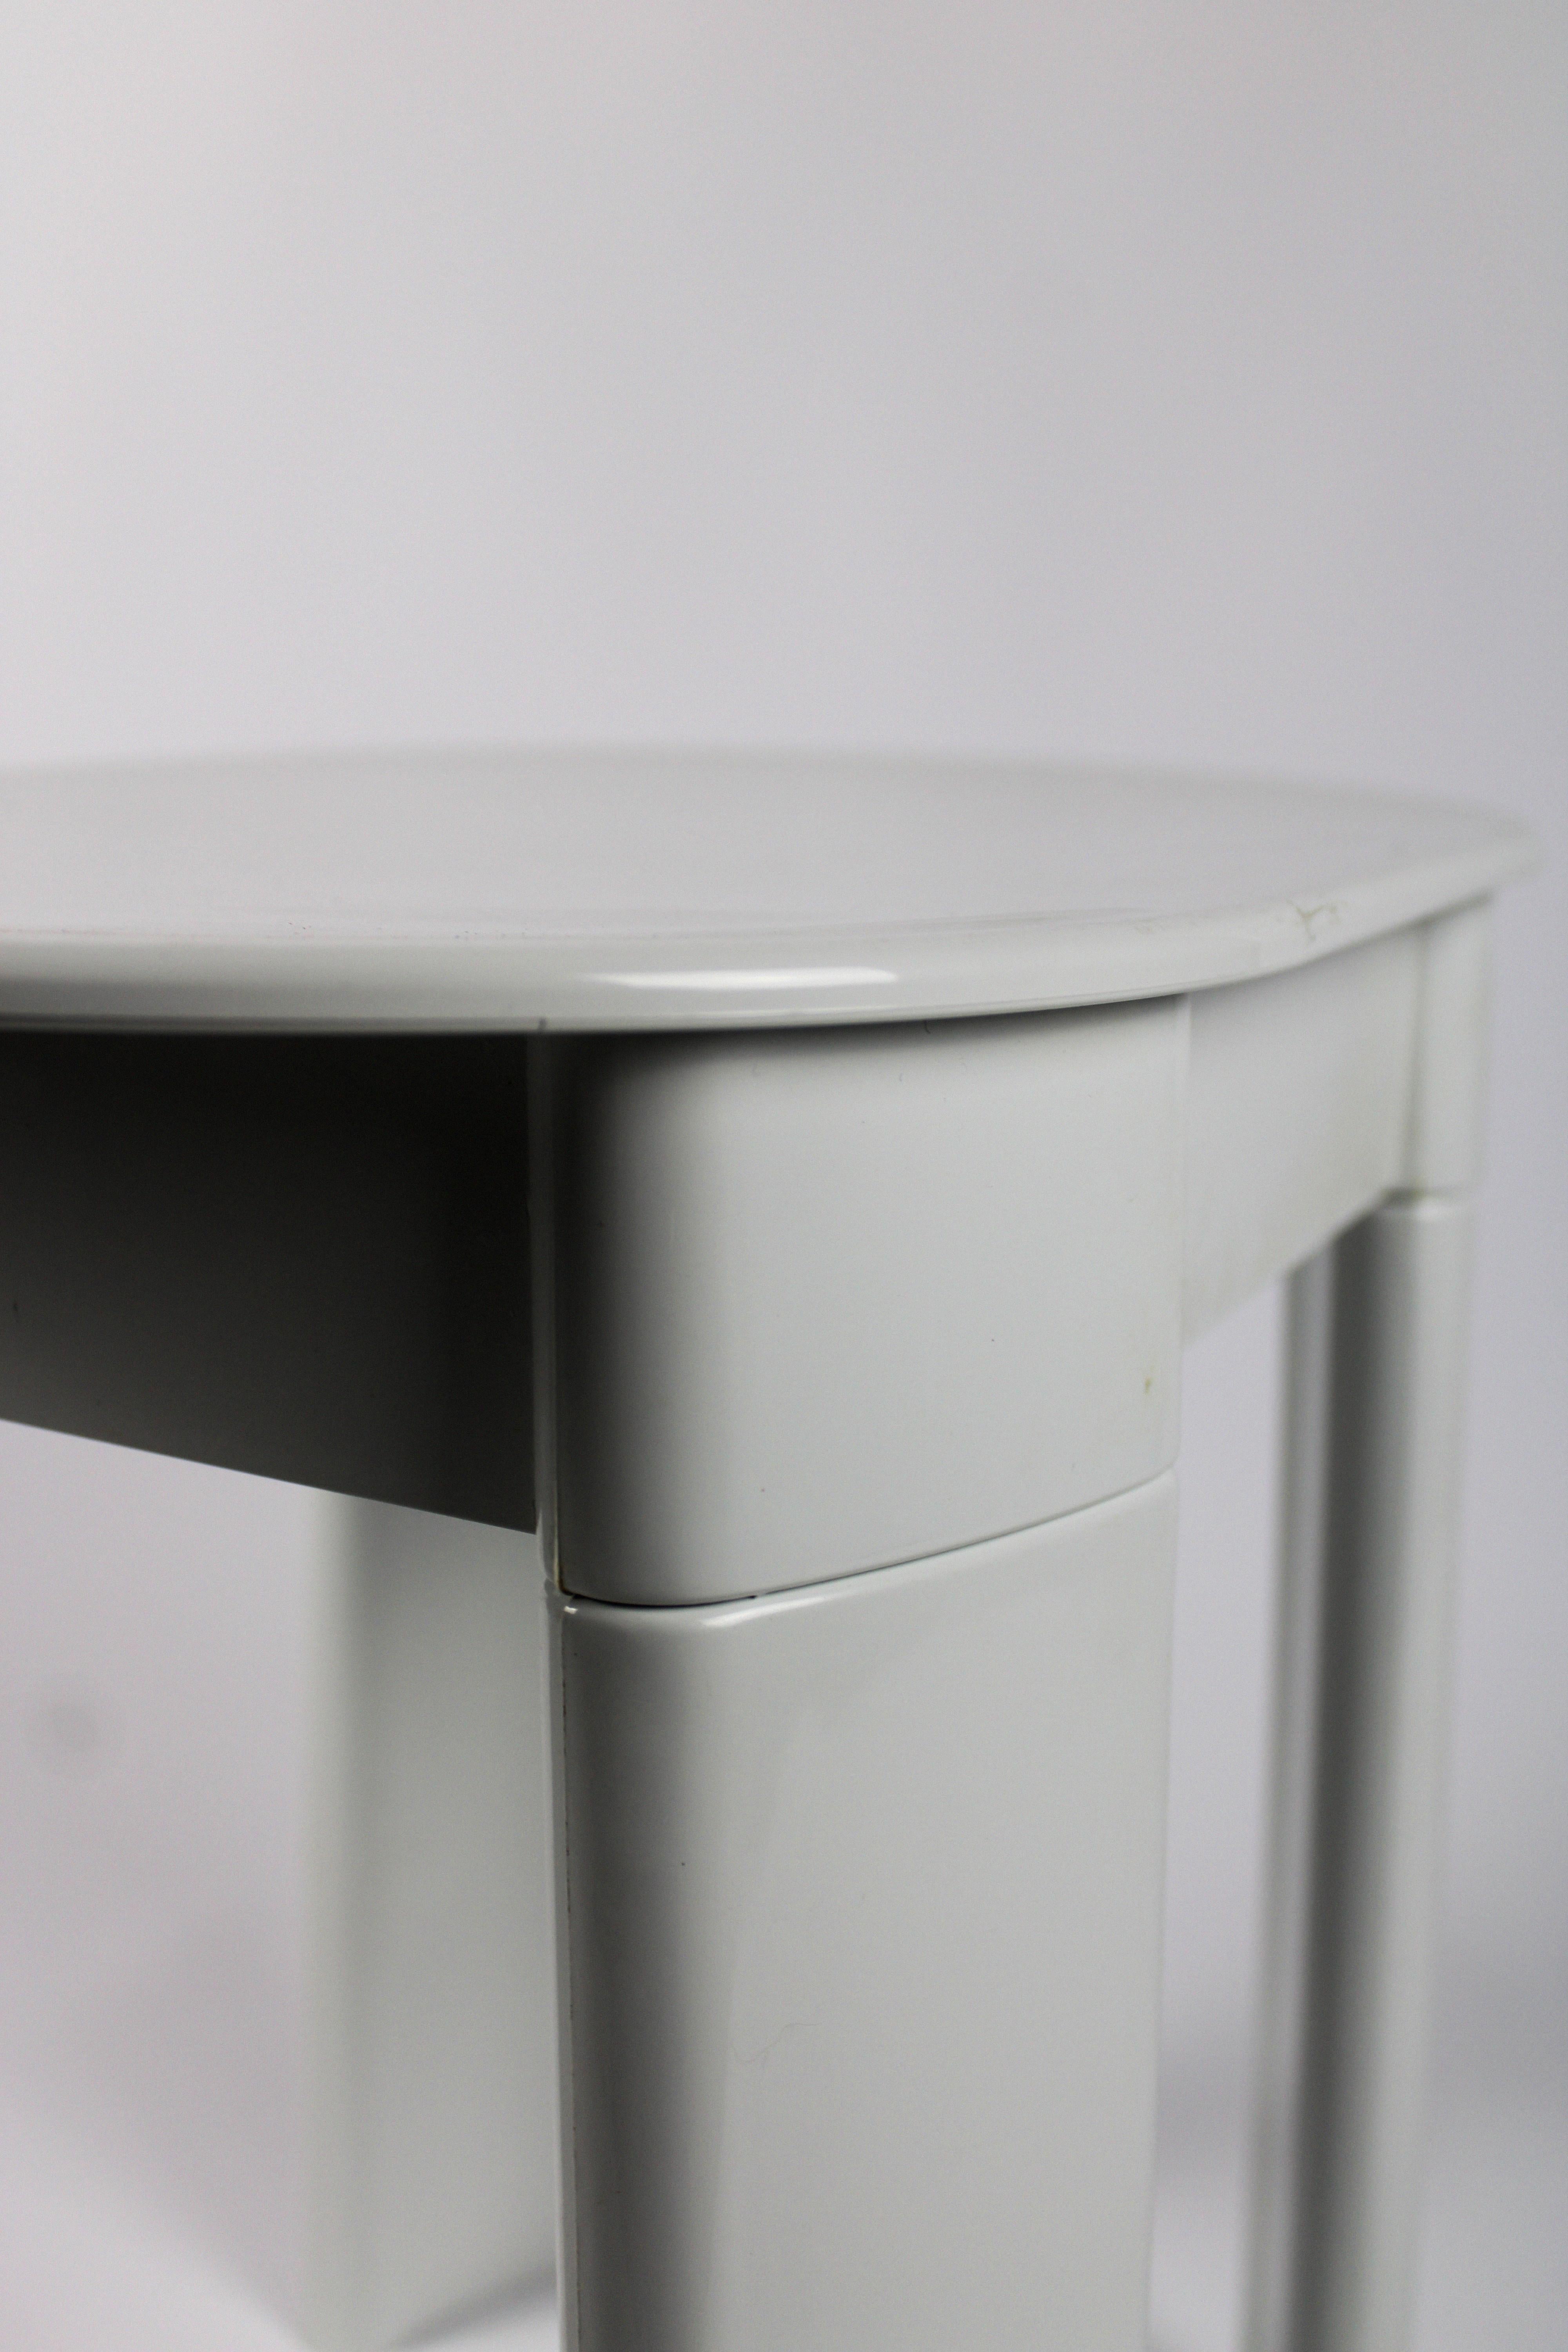 Olaf Von Bohr Side Table Space Age Stool Gedy Plastic Italy 1970's For Sale 4